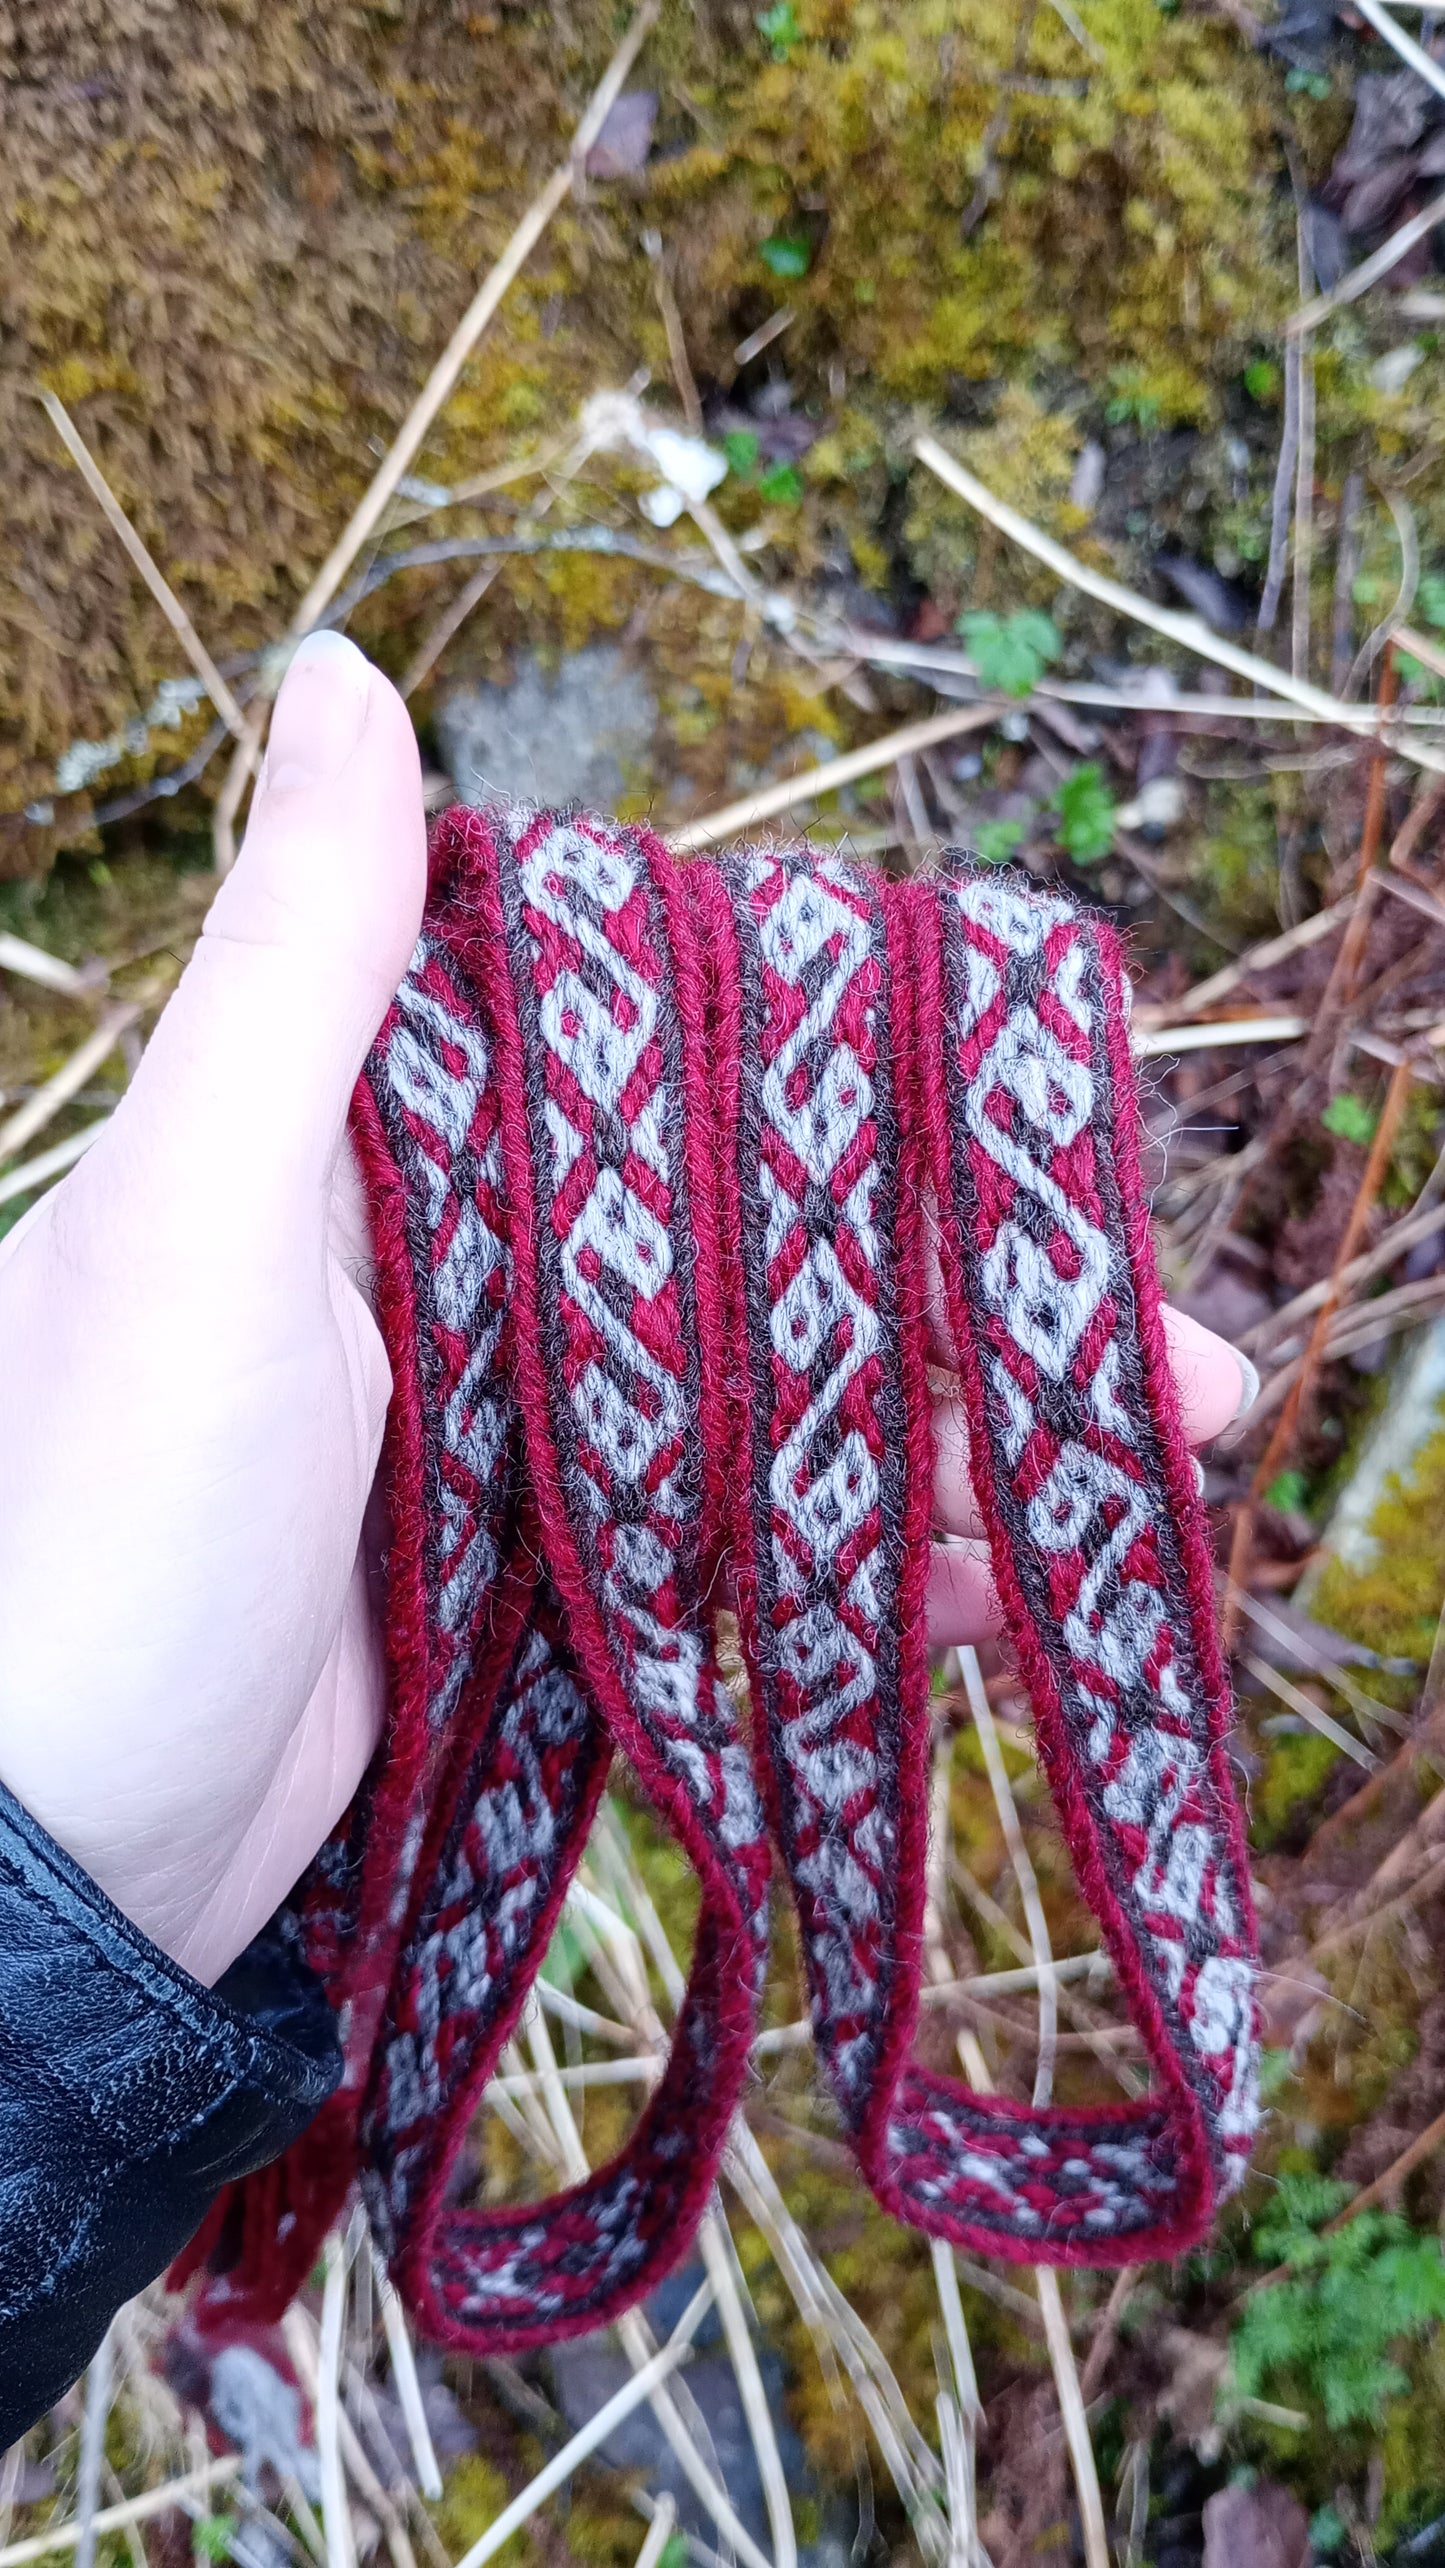 Tablet woven belt based on pre-christian Latvian band (cruelty free wool)